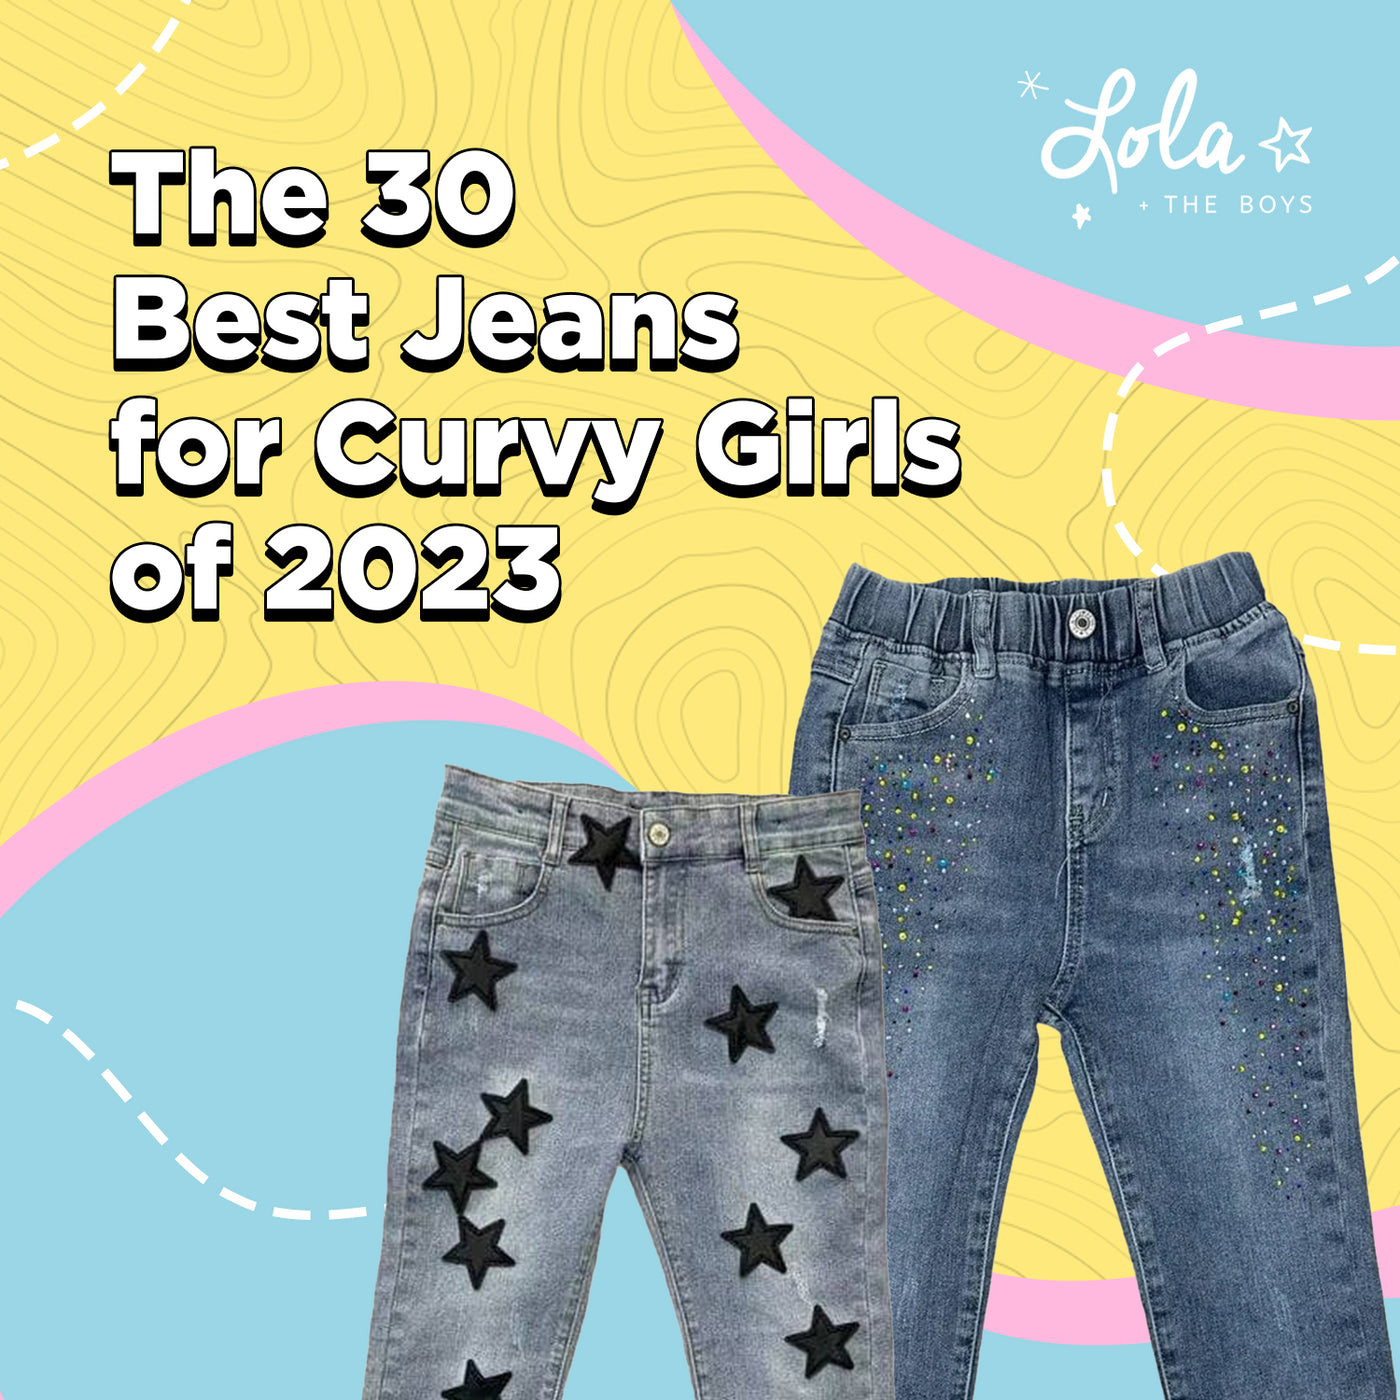 I Found The Best Jeans for Curvy Girls